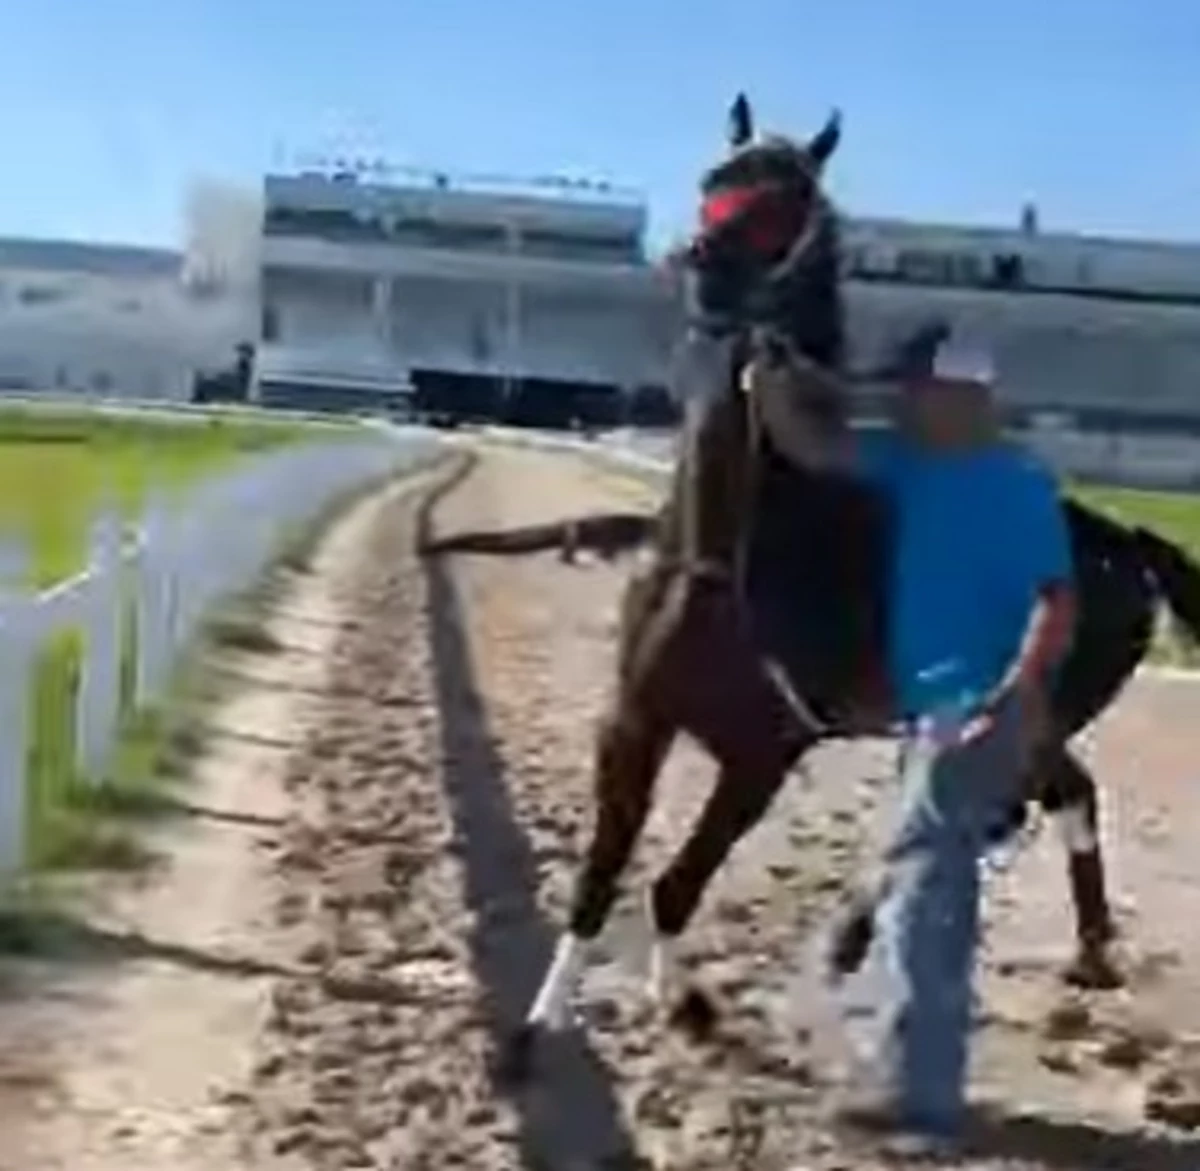 Watch as Alligator Makes it onto Louisiana Horse Racing Track